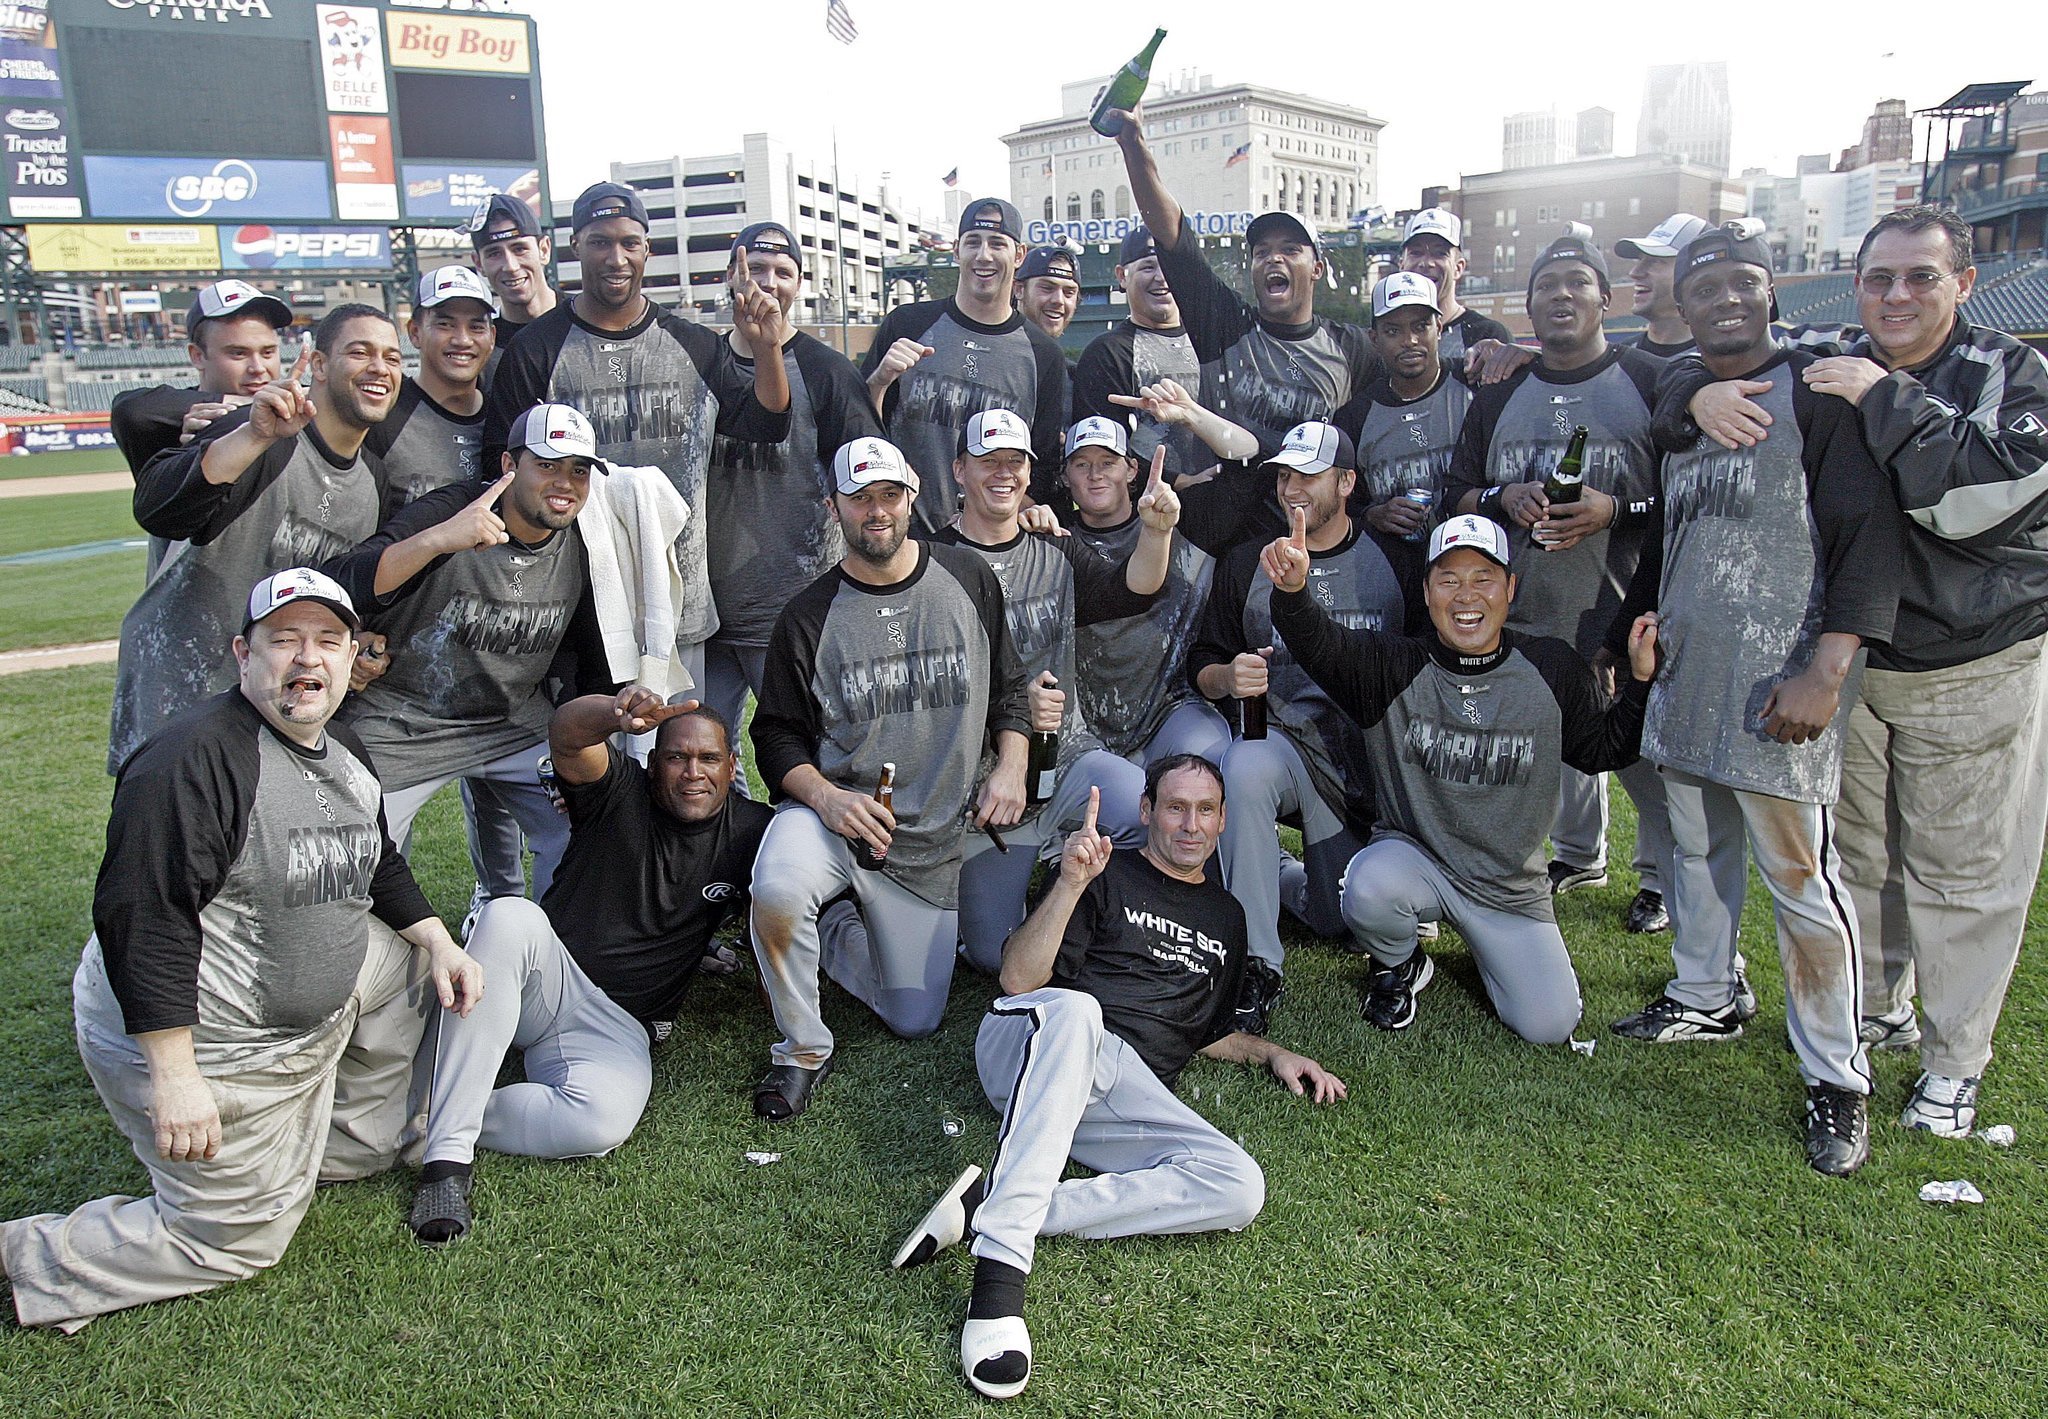 The Chicago White Sox unveil their 2005 World Series Championship